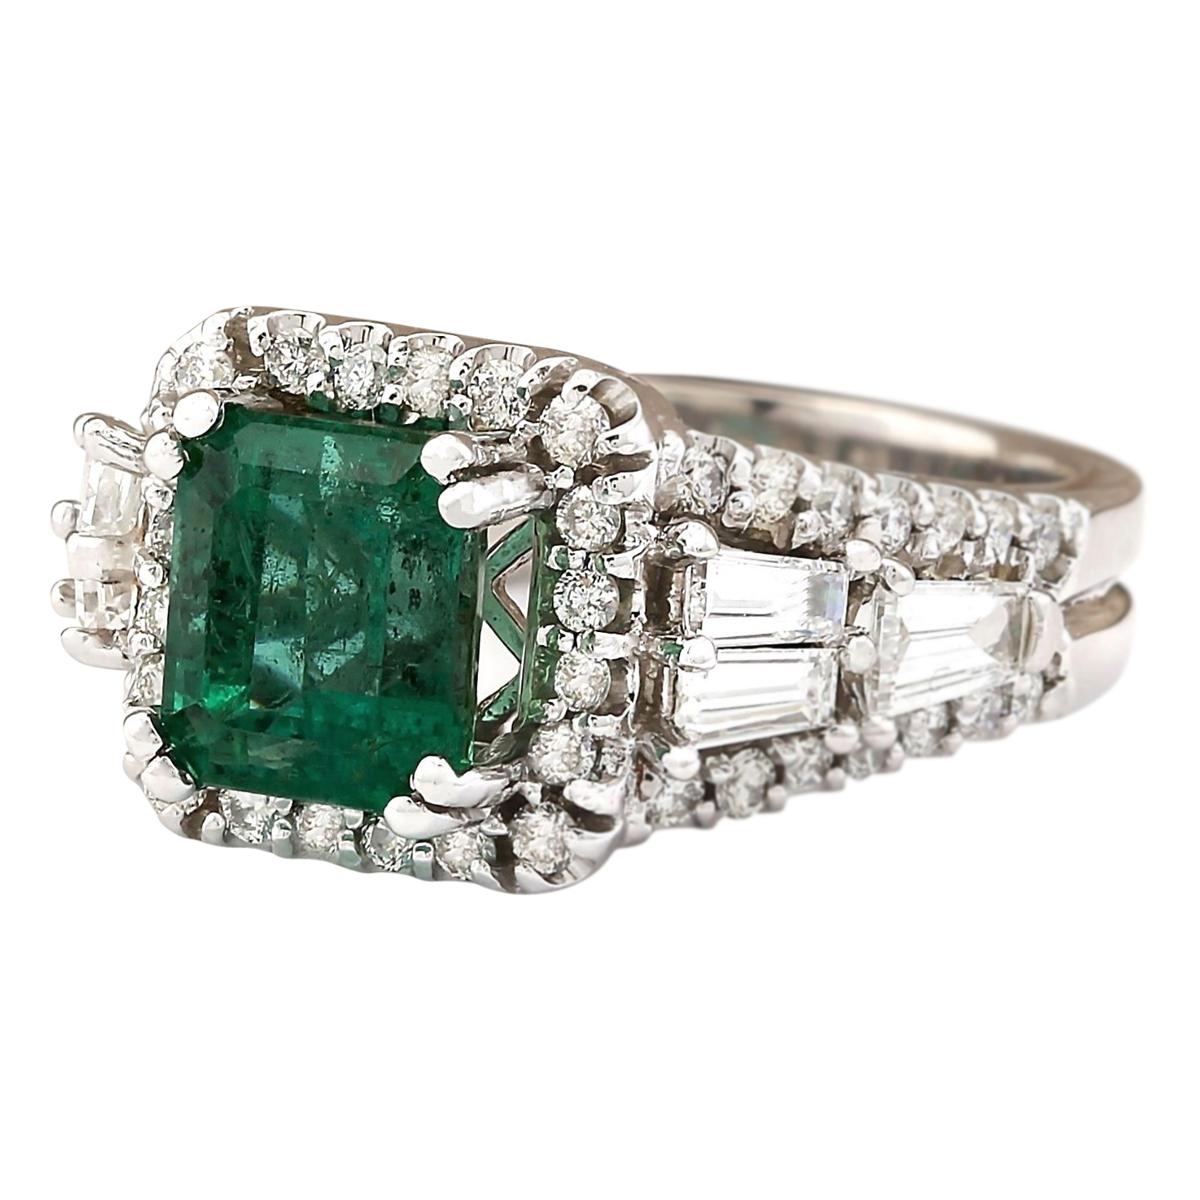 Stamped: 18K White Gold<br>Total Ring Weight: 7.7 Grams<br>Ring Length: N/A<br>Ring Width: N/A<br>Gemstone Weight: Total Natural Emerald Weight is 2.65 Carat (Measures: 7.80x6.62 mm)<br>Color: Green<br>Diamond Weight: Total Natural Diamond Weight is